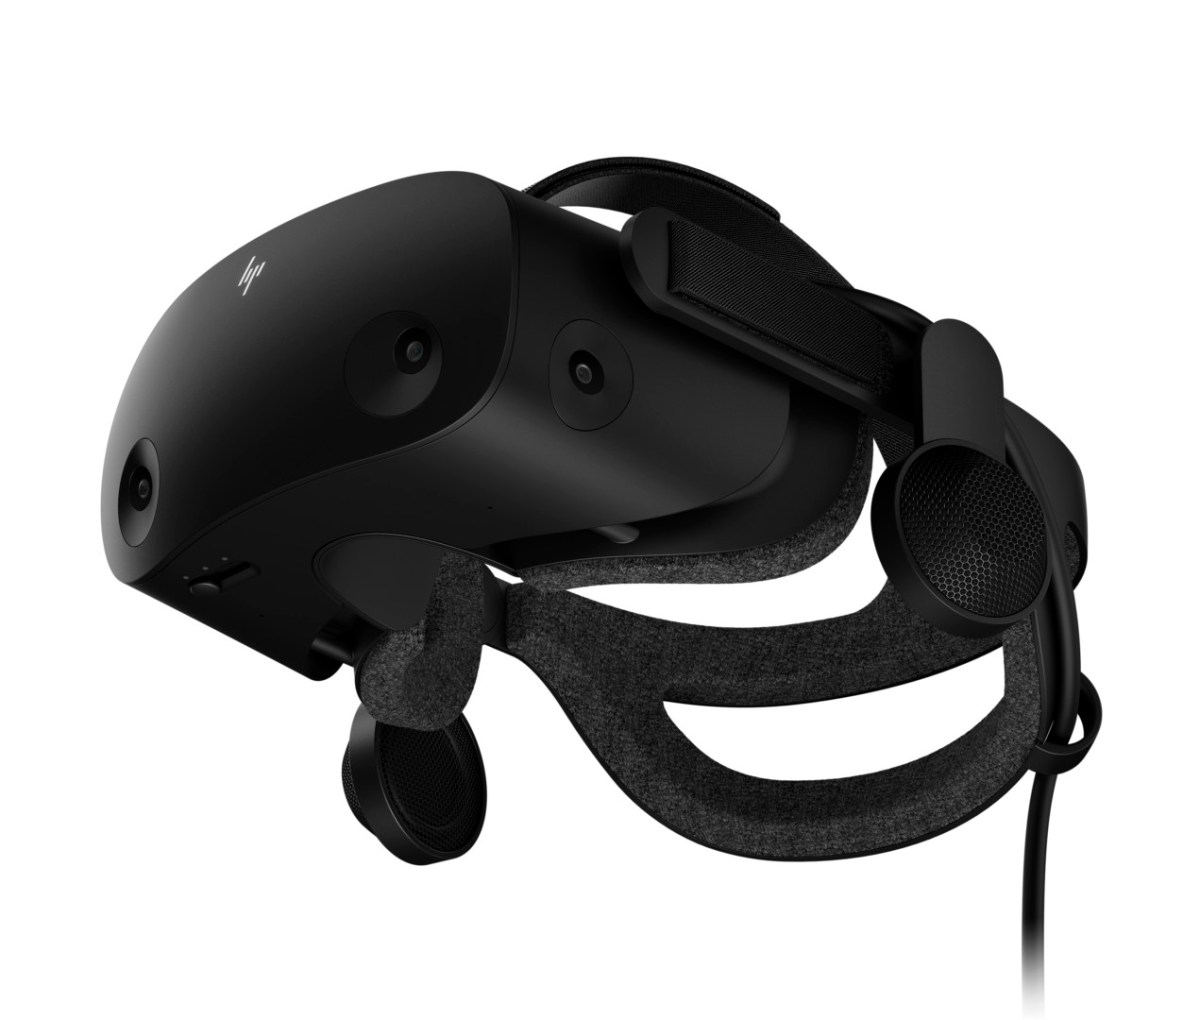 Hp Reverb G2 VR Headset with Valve and Microsoft